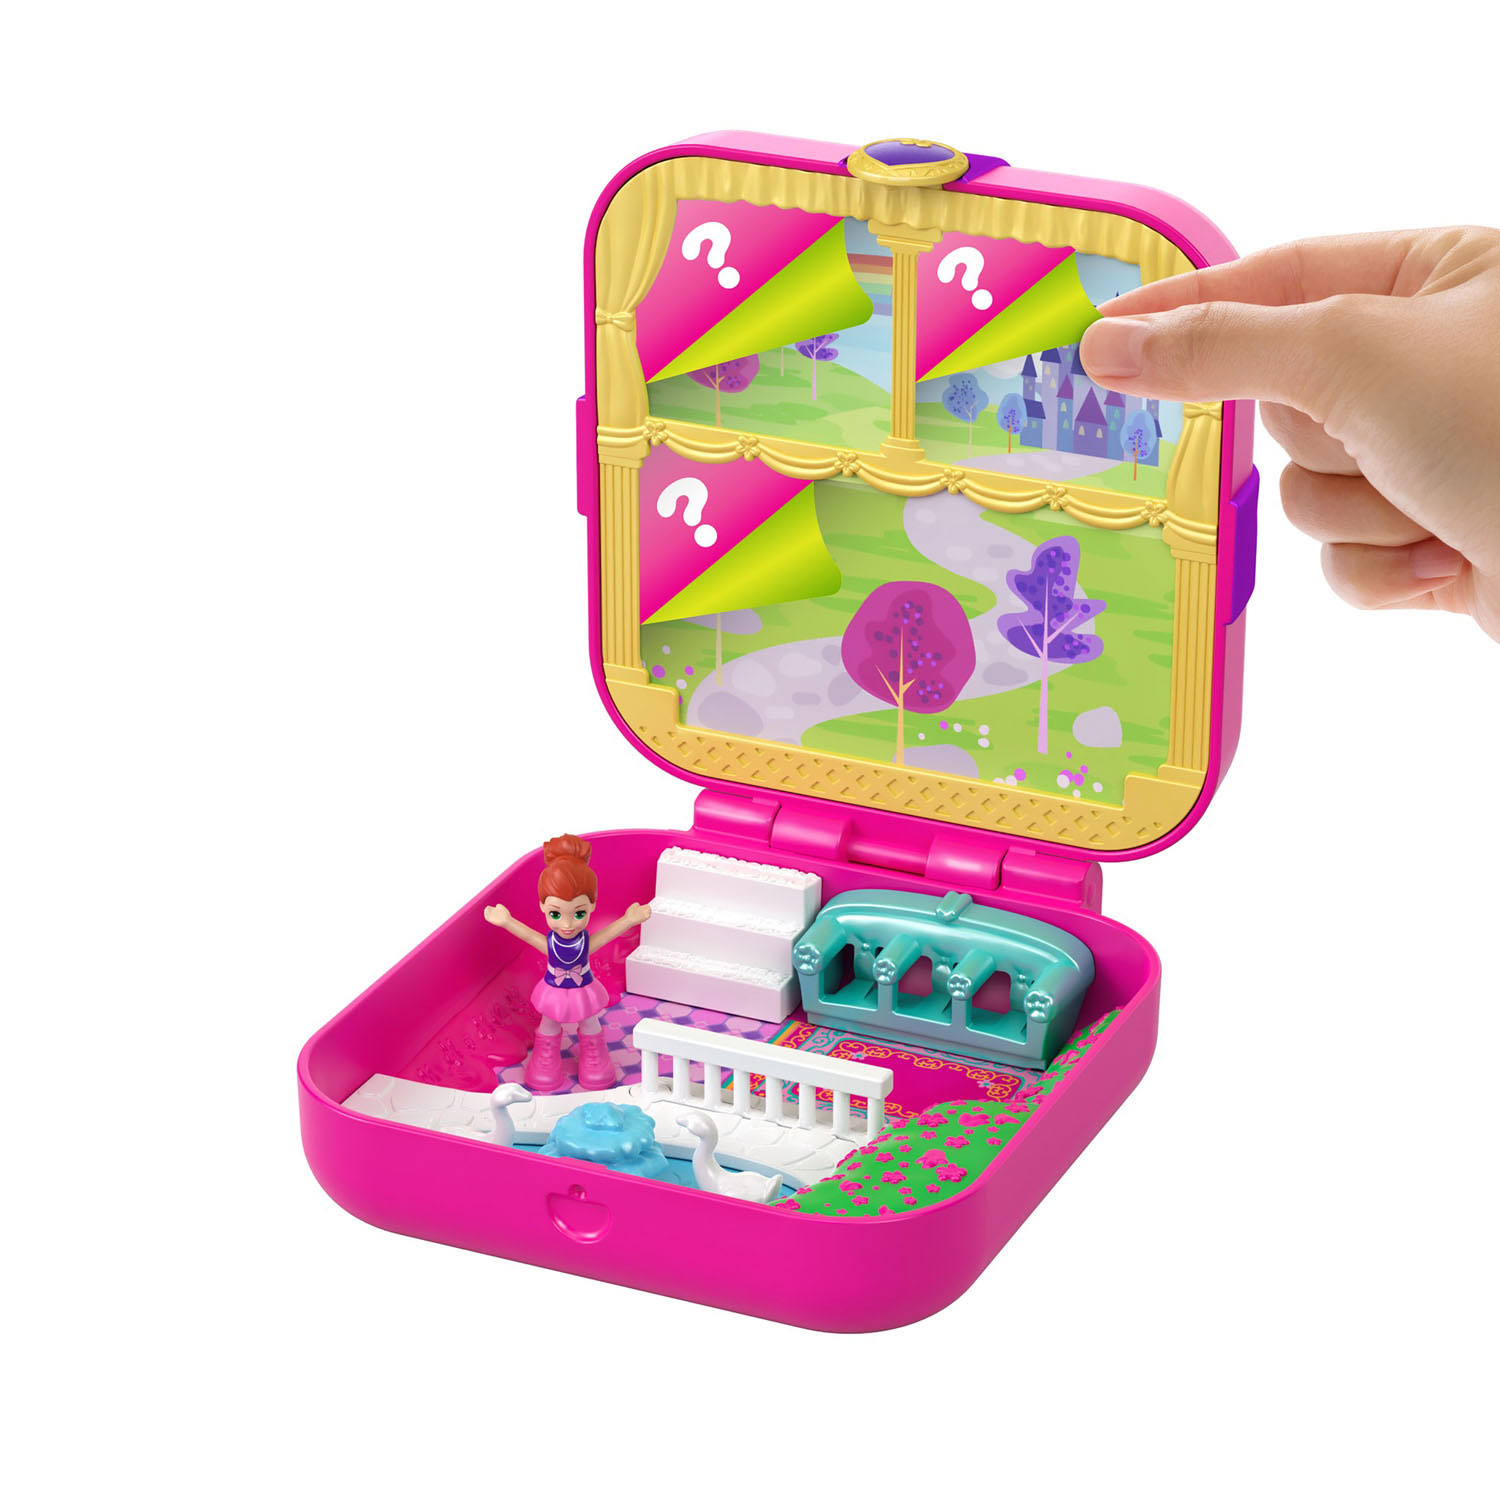  Polly Pocket Tiny Pocket Places Studio Compact with